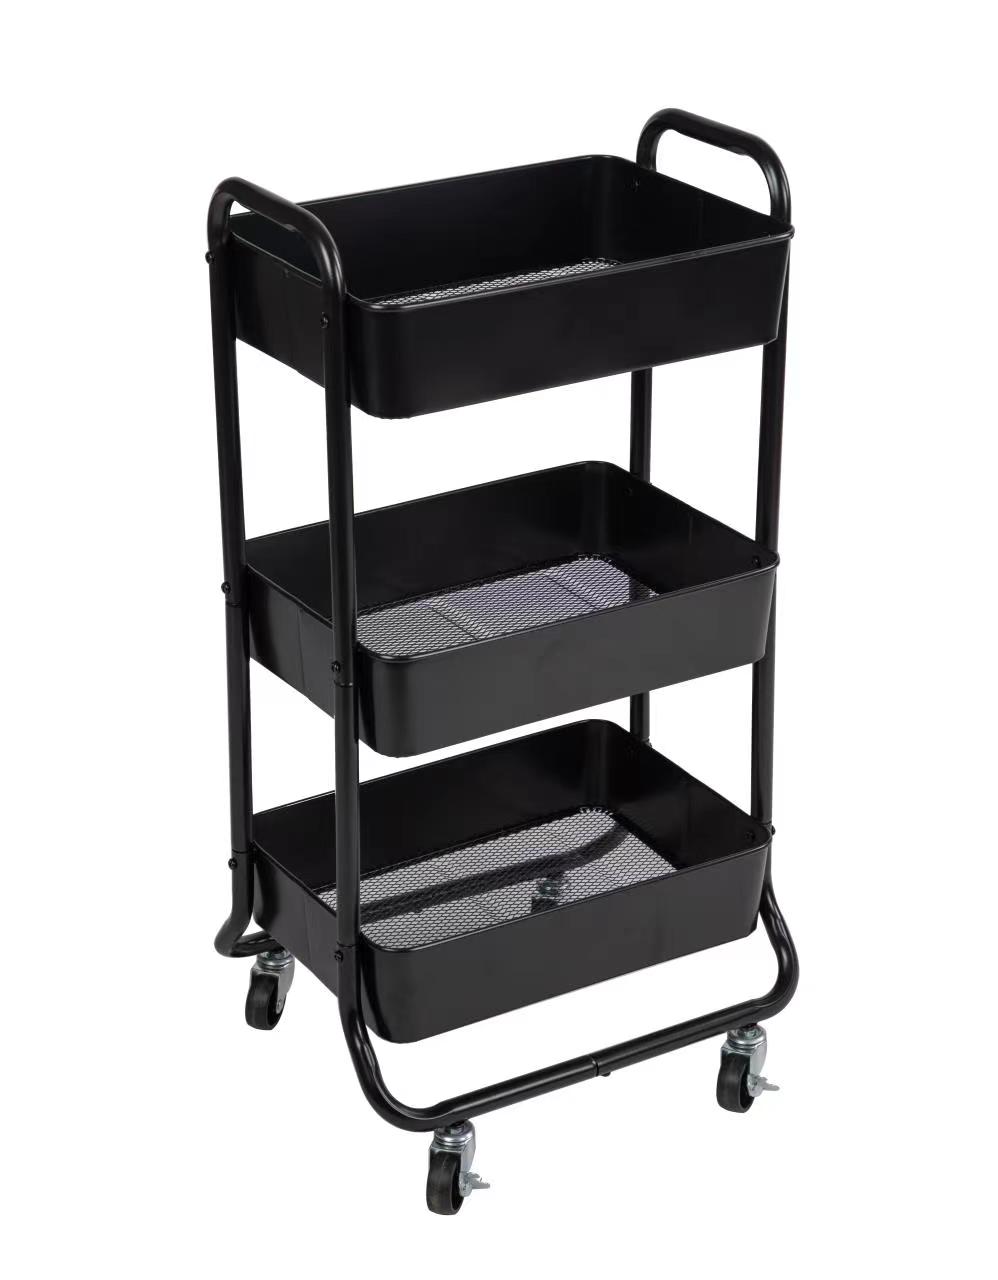 Mainstays 3 Tier Metal Utility Cart Rich Black,  Laundry Baskets, Powder Coating,  Adult and Child - image 1 of 6